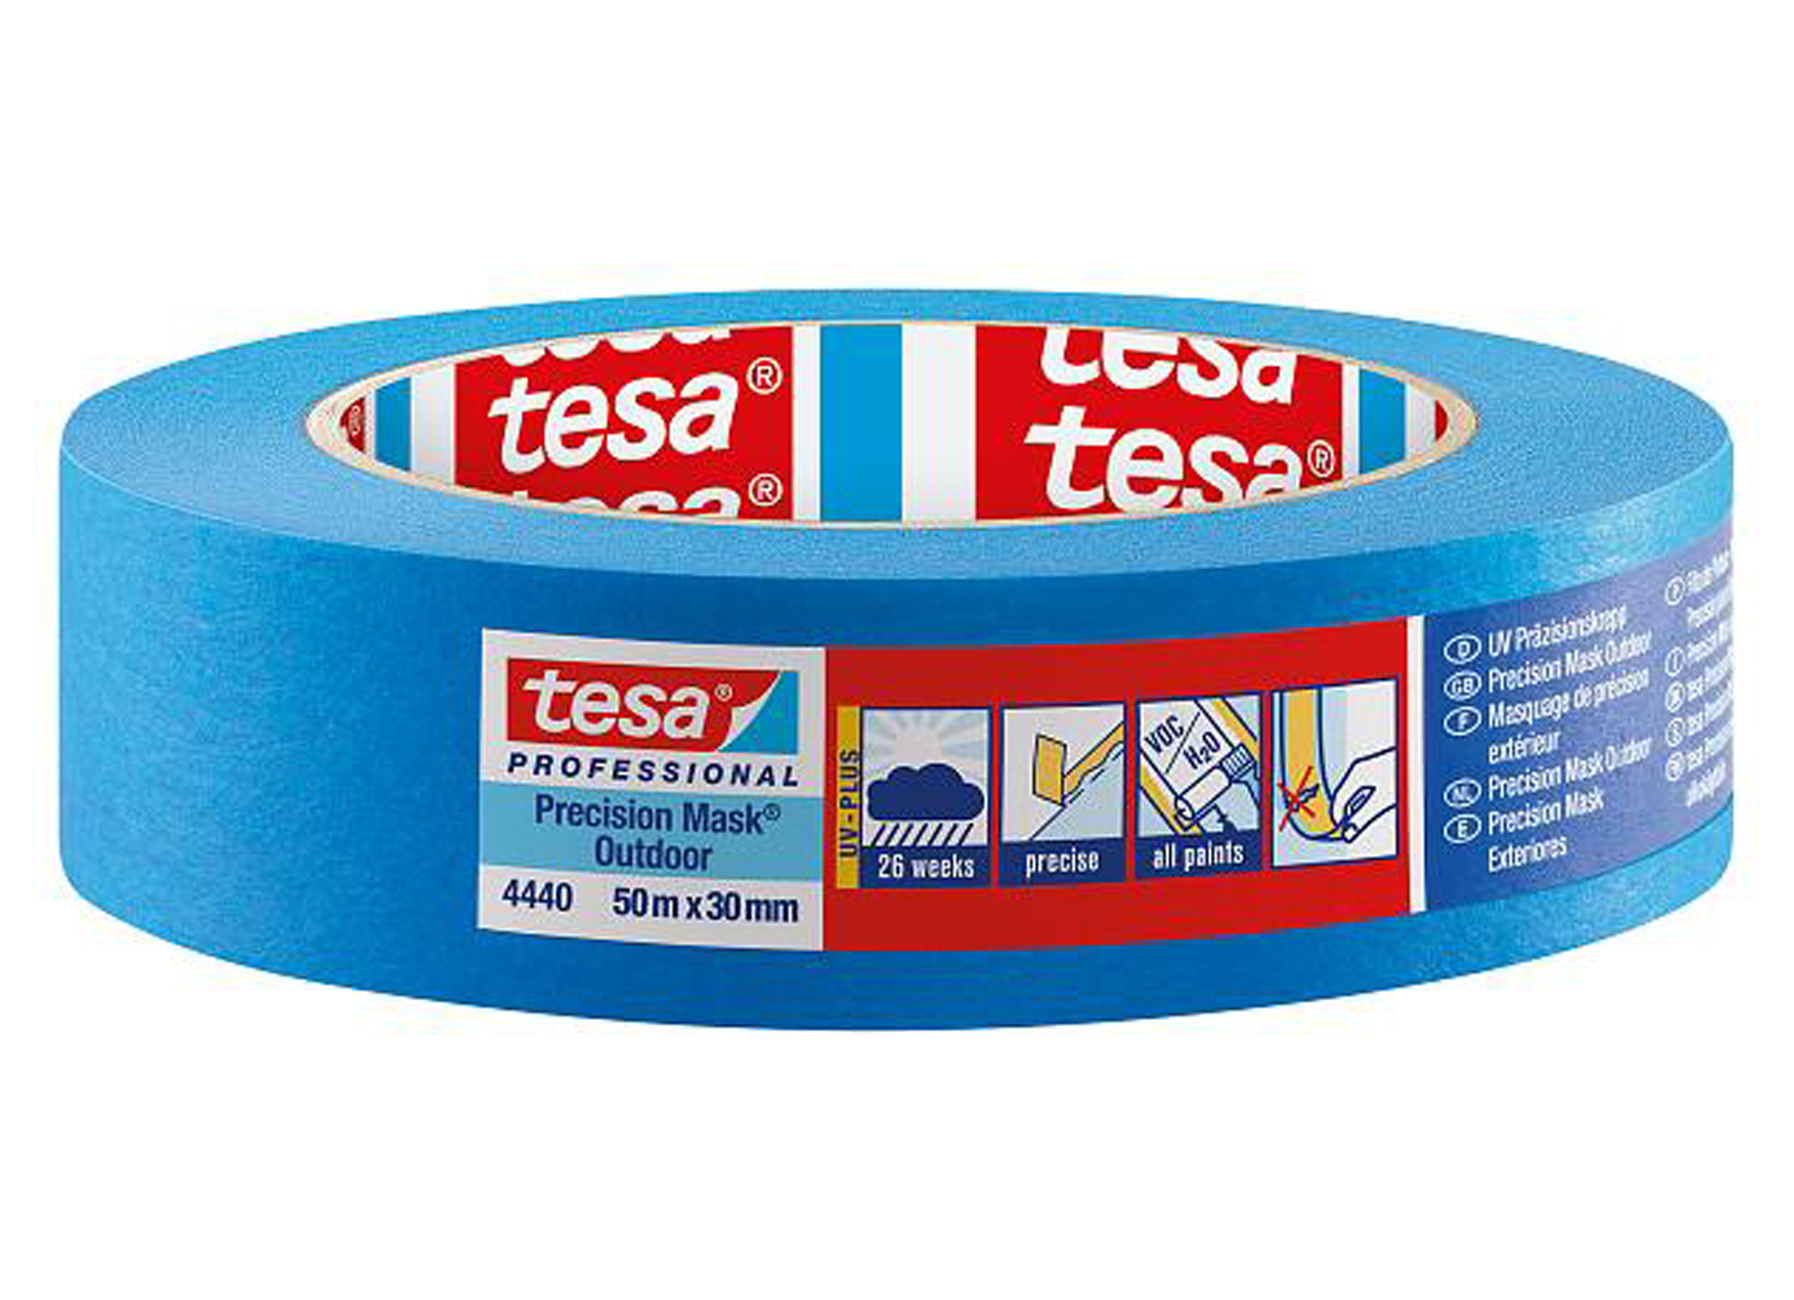 TESA PRECISION MASK OUTDOOR ROBUST 50M X 30MM